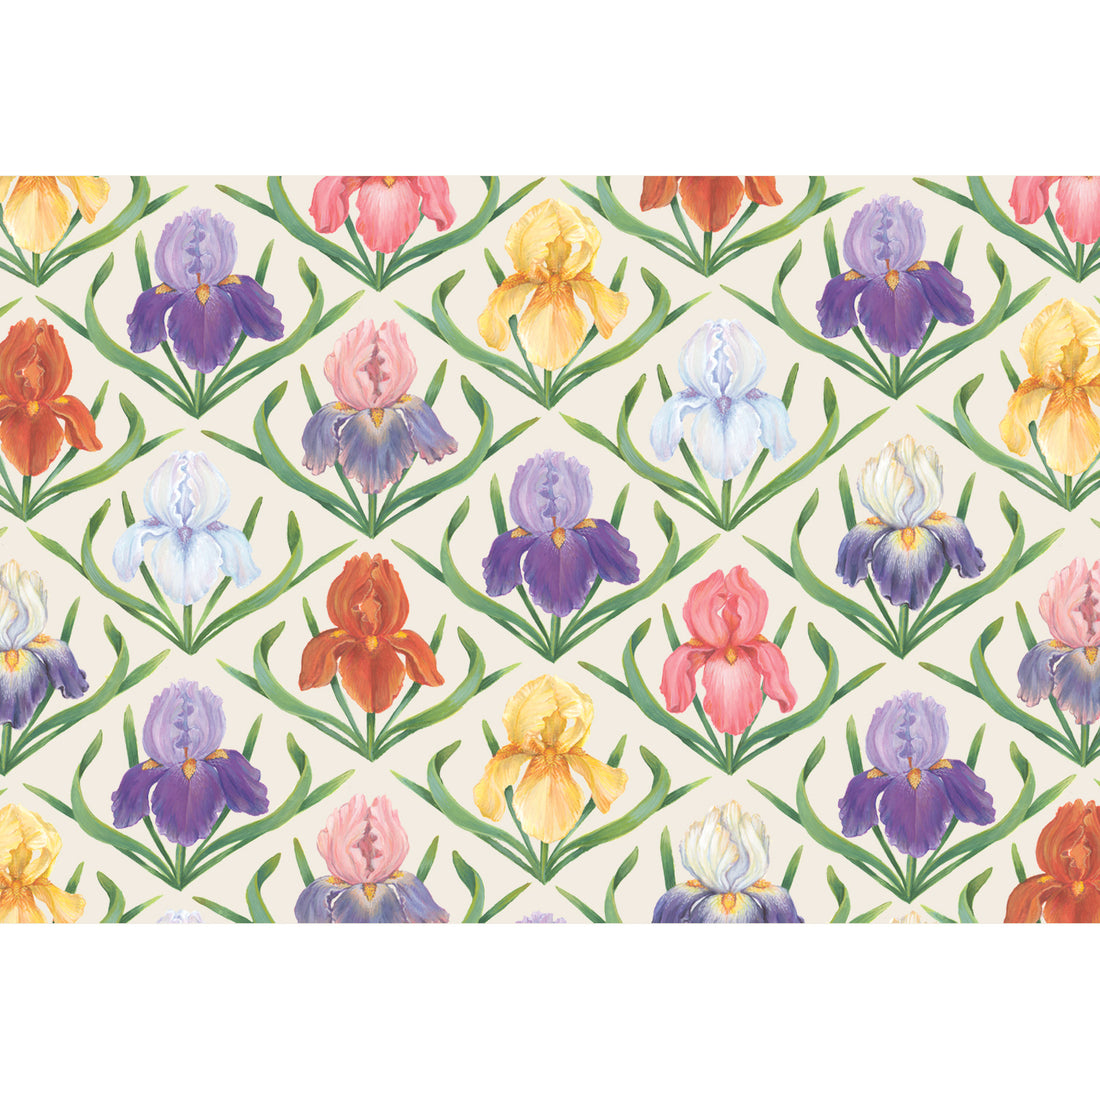 An illustrated diagonal grid of colorful iris blooms in purple, white, pink, red and yellow, each framed with long green leaves, over a cream background.